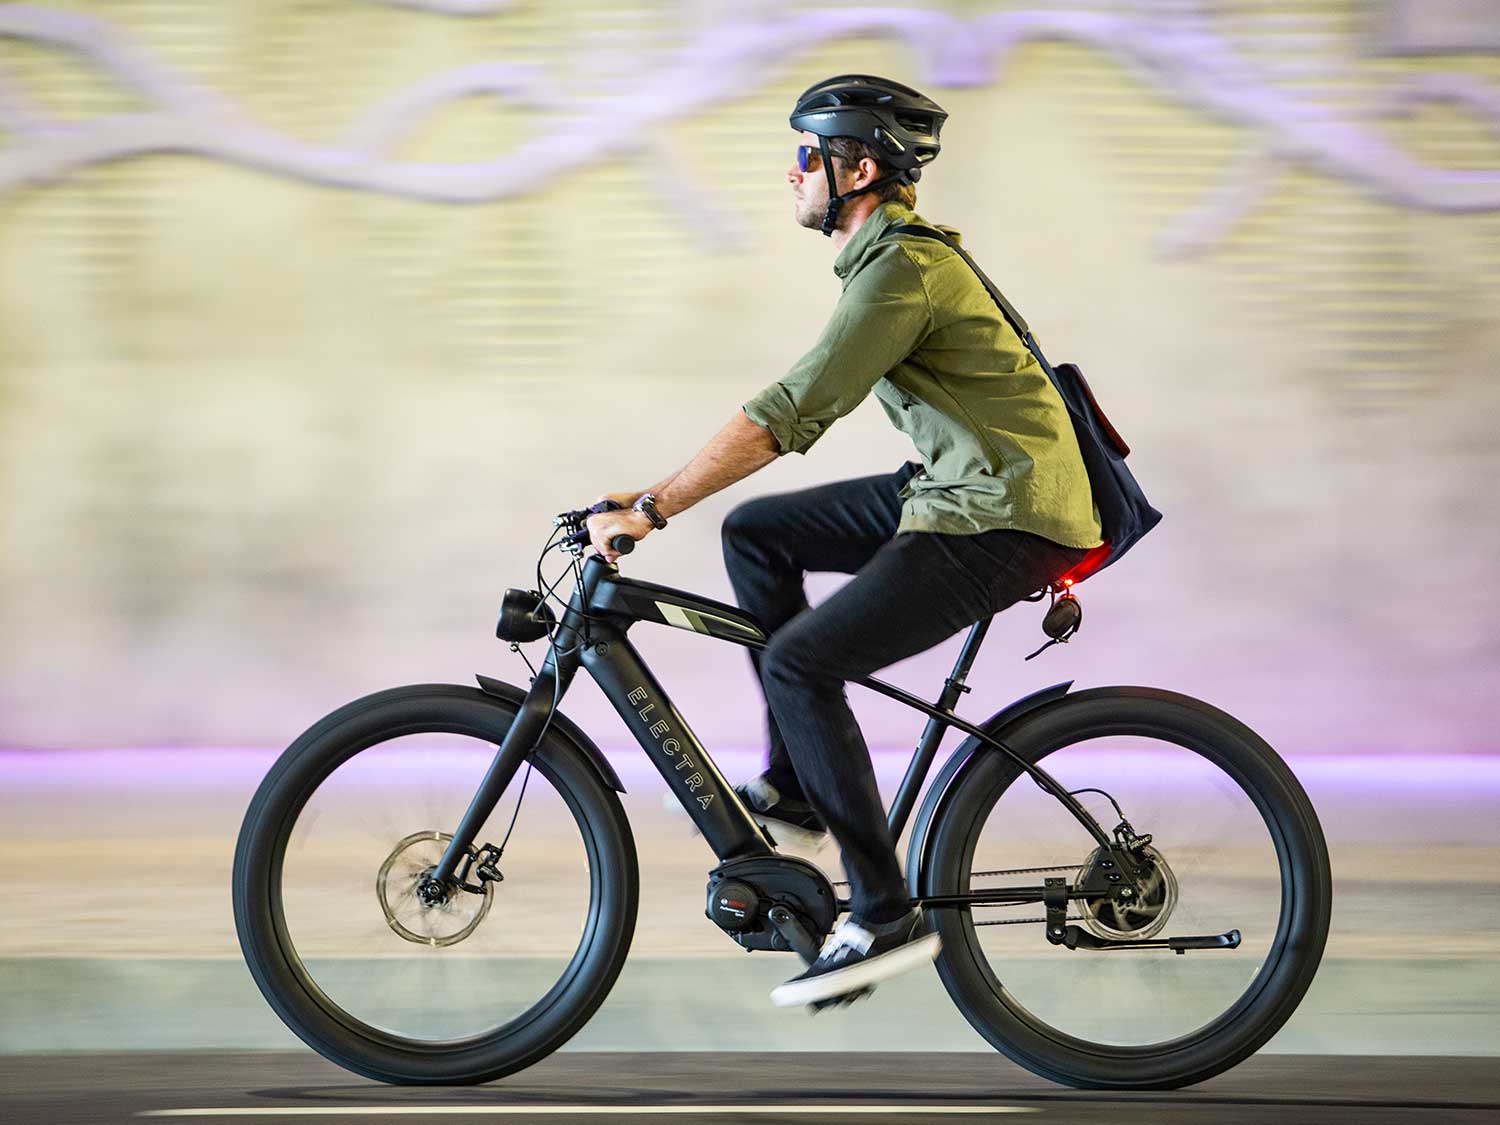 What Is An Ebike? What Is A Pedal Electric Bicycle?